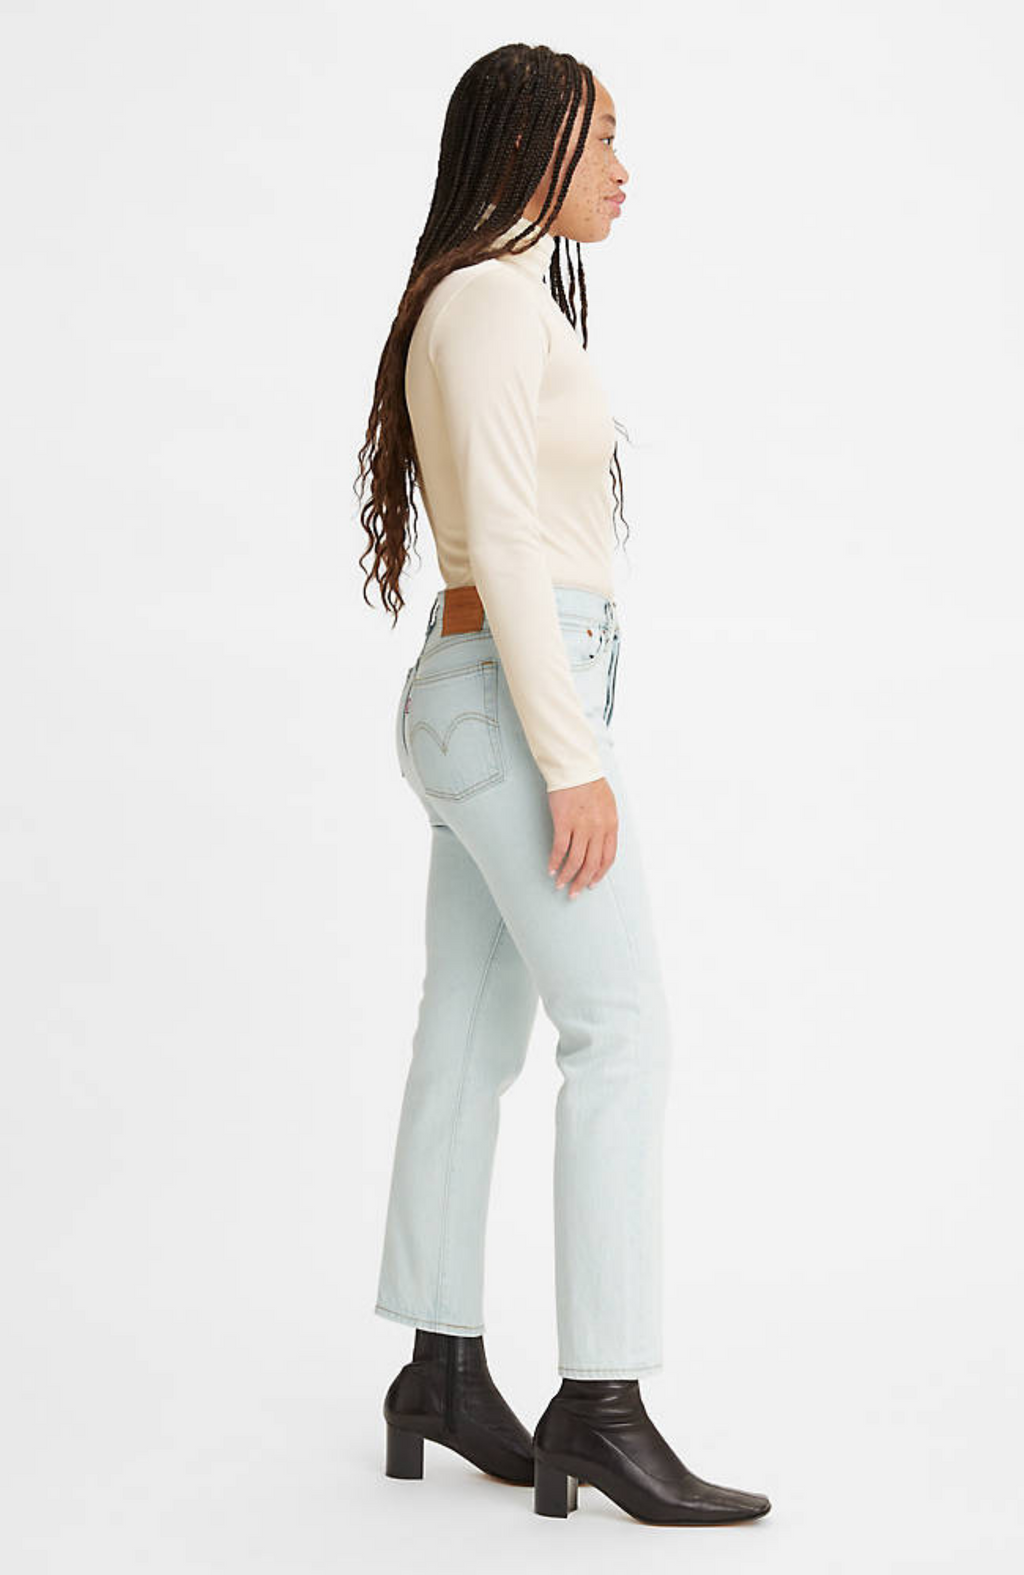 Levi's Premium - Wedgie Straight Leg Jeans In Think Outside